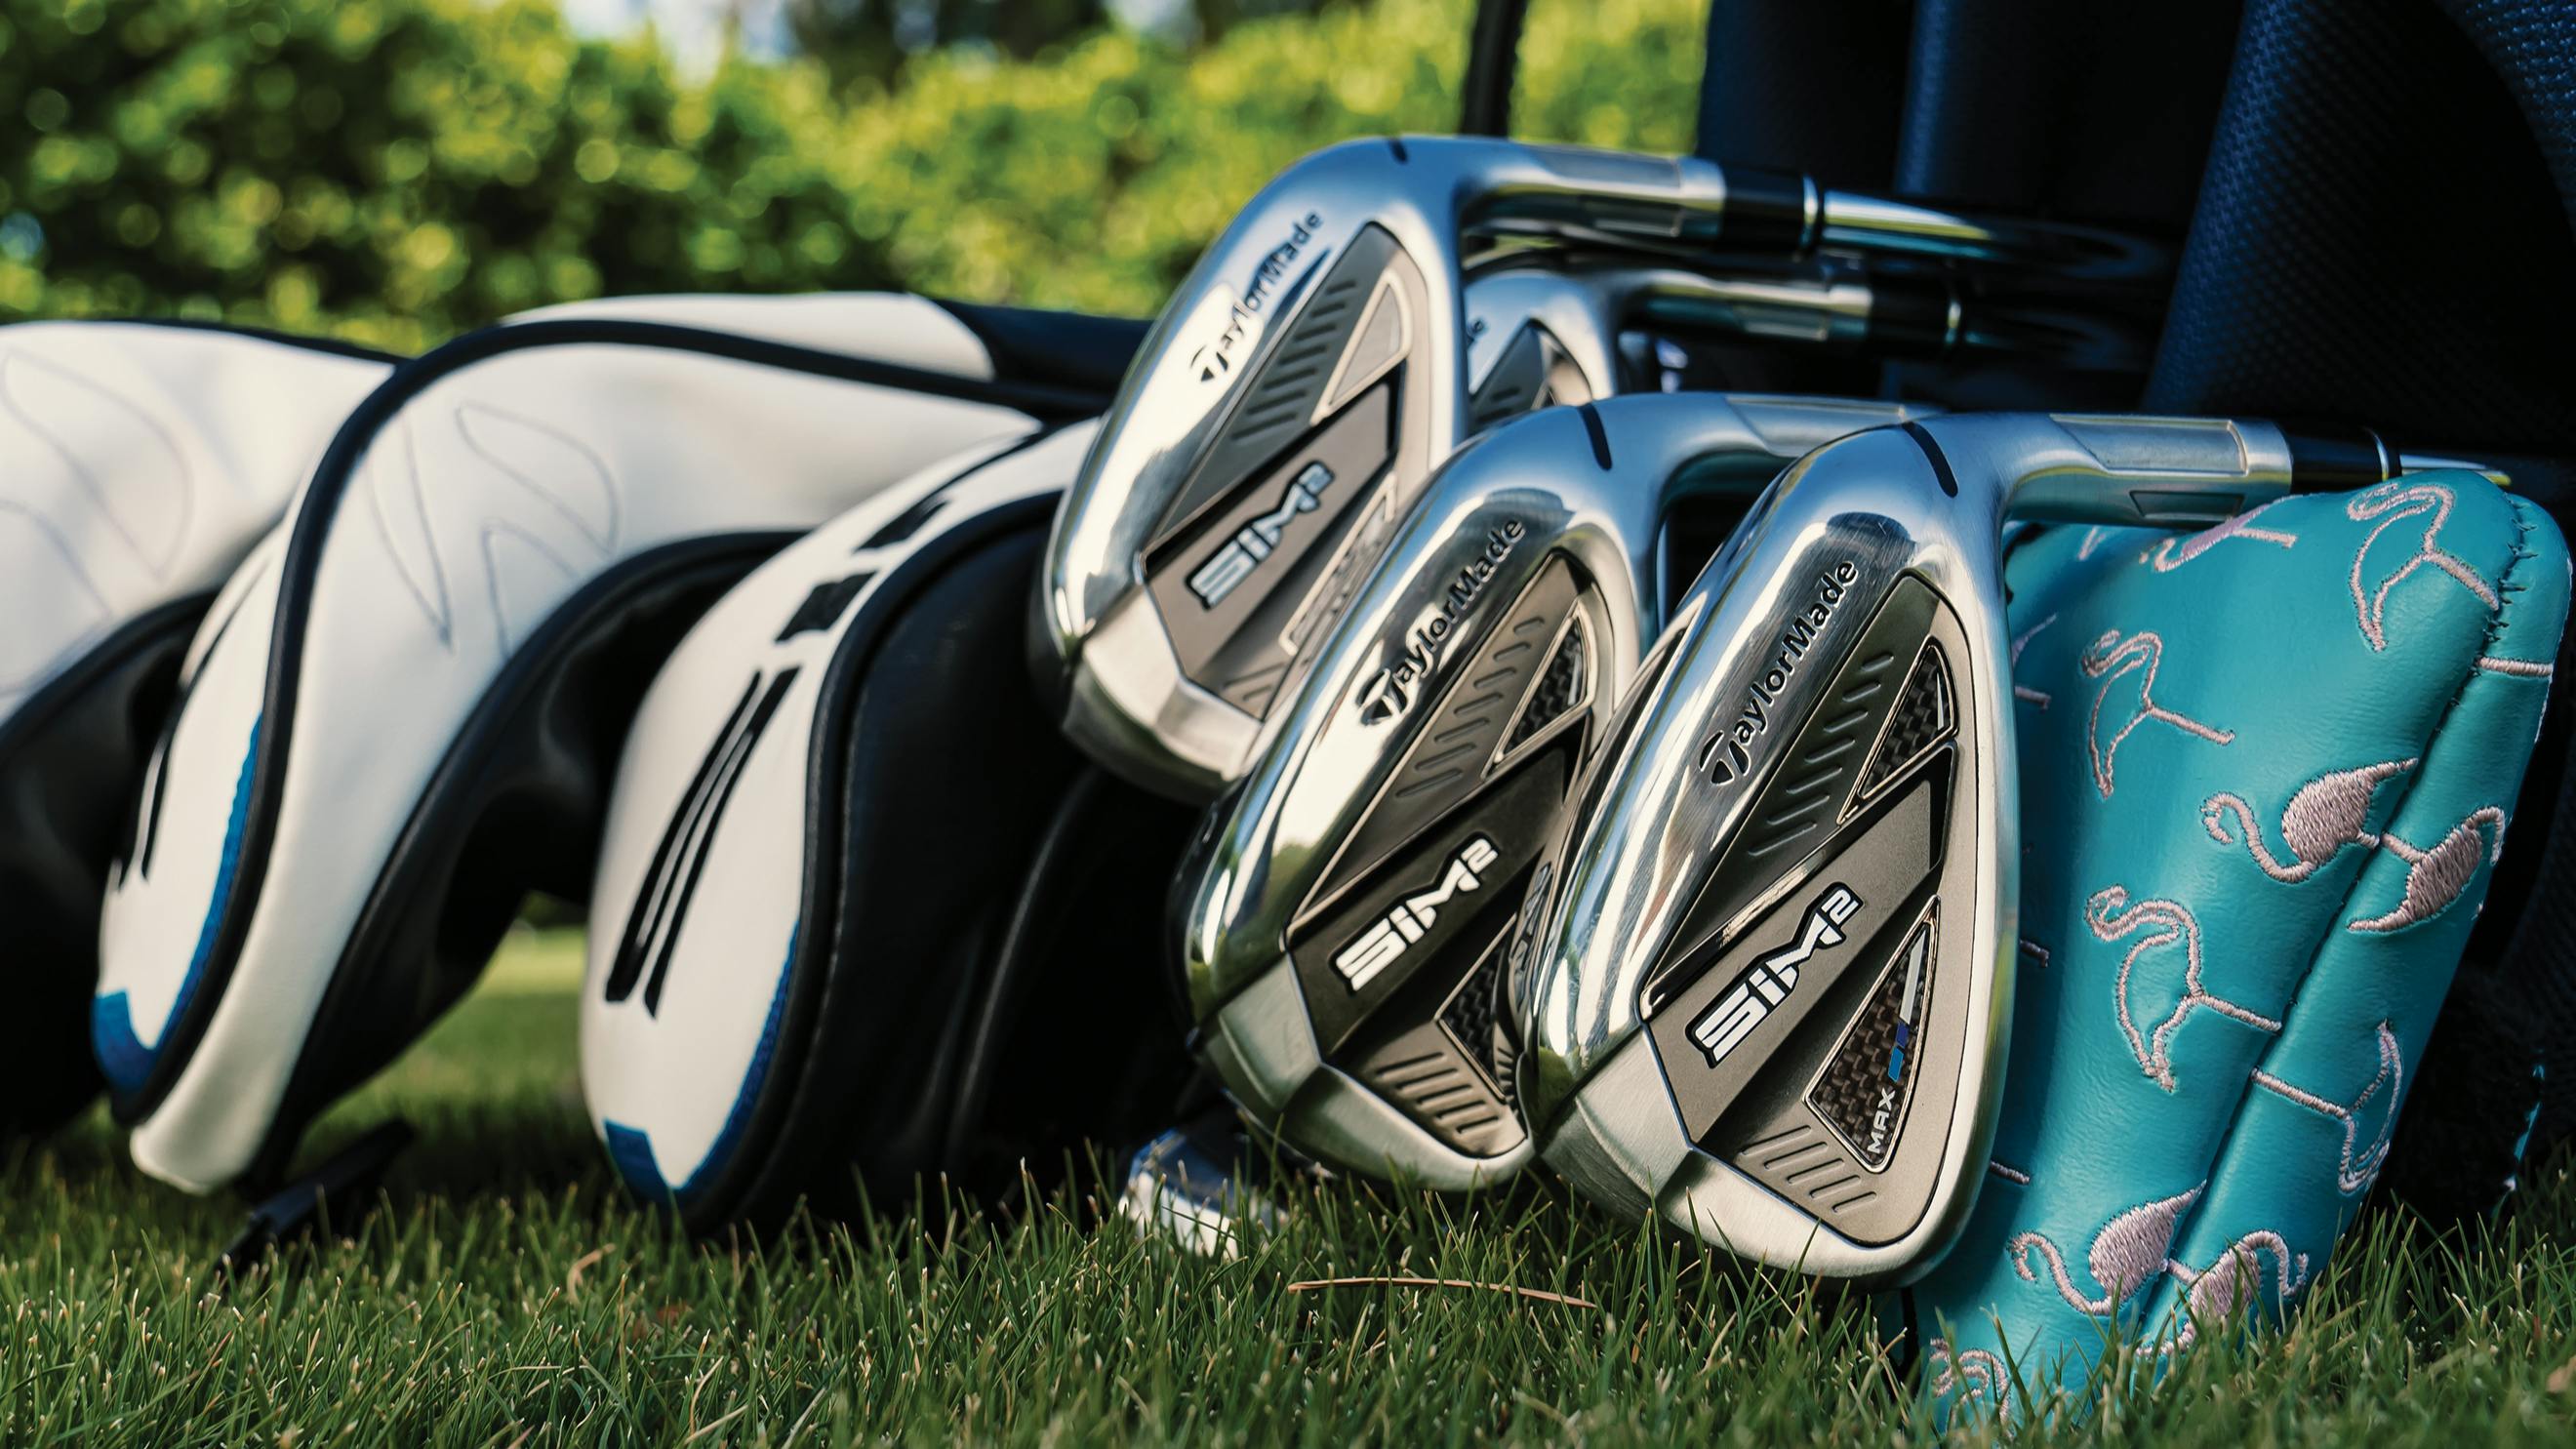 A golf bag lies on its side in the grass and the clubs are visible—some in headcovers, some not.